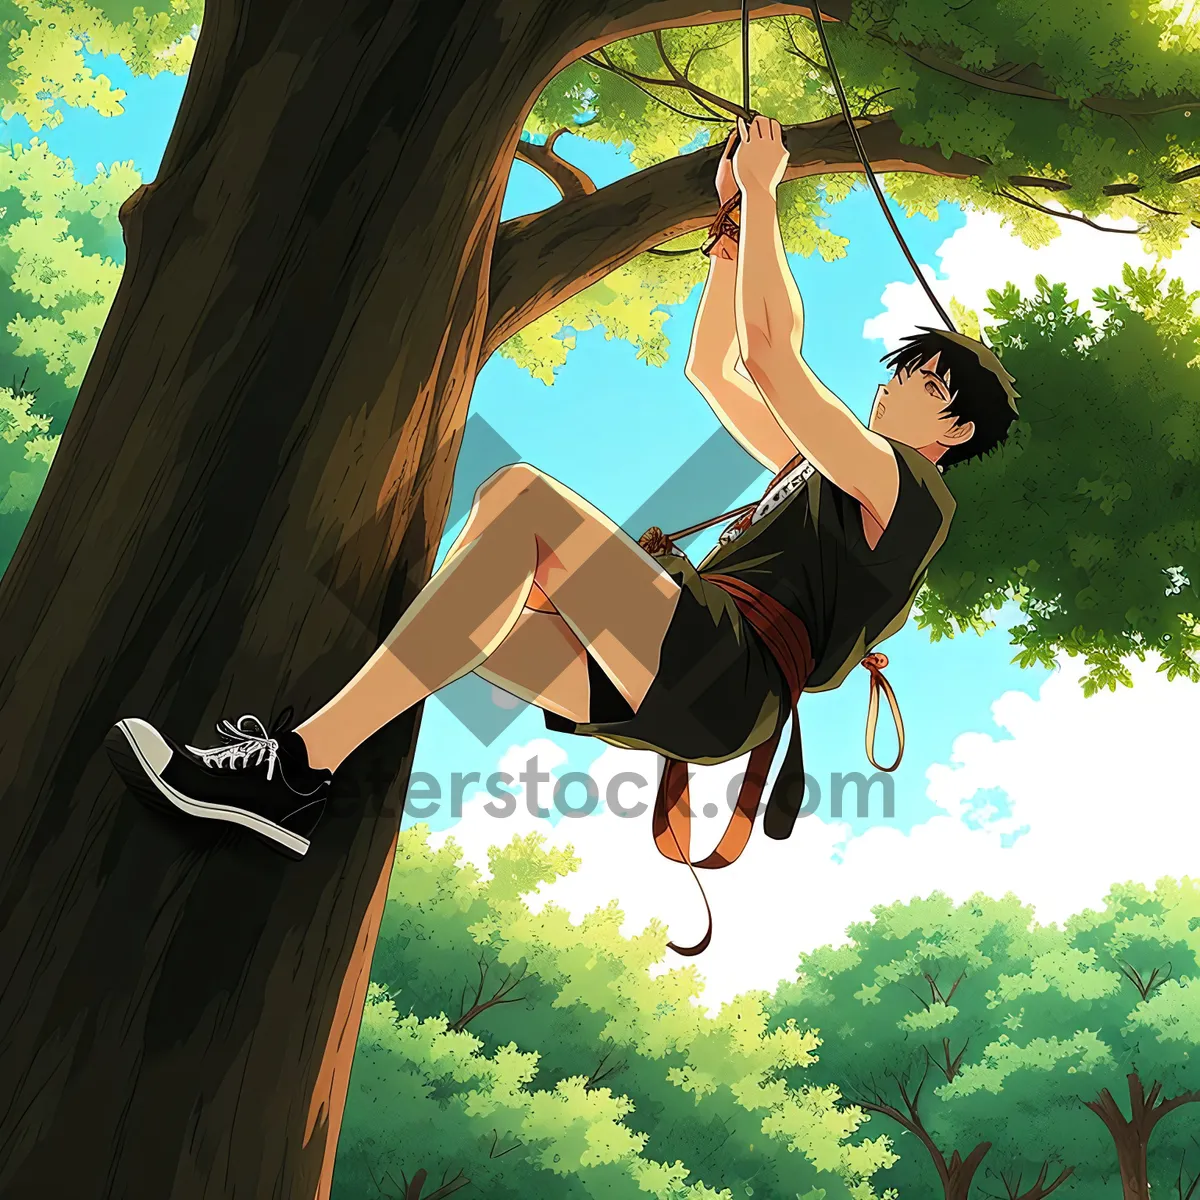 Picture of Swinging under the shady tree with a colorful umbrella.